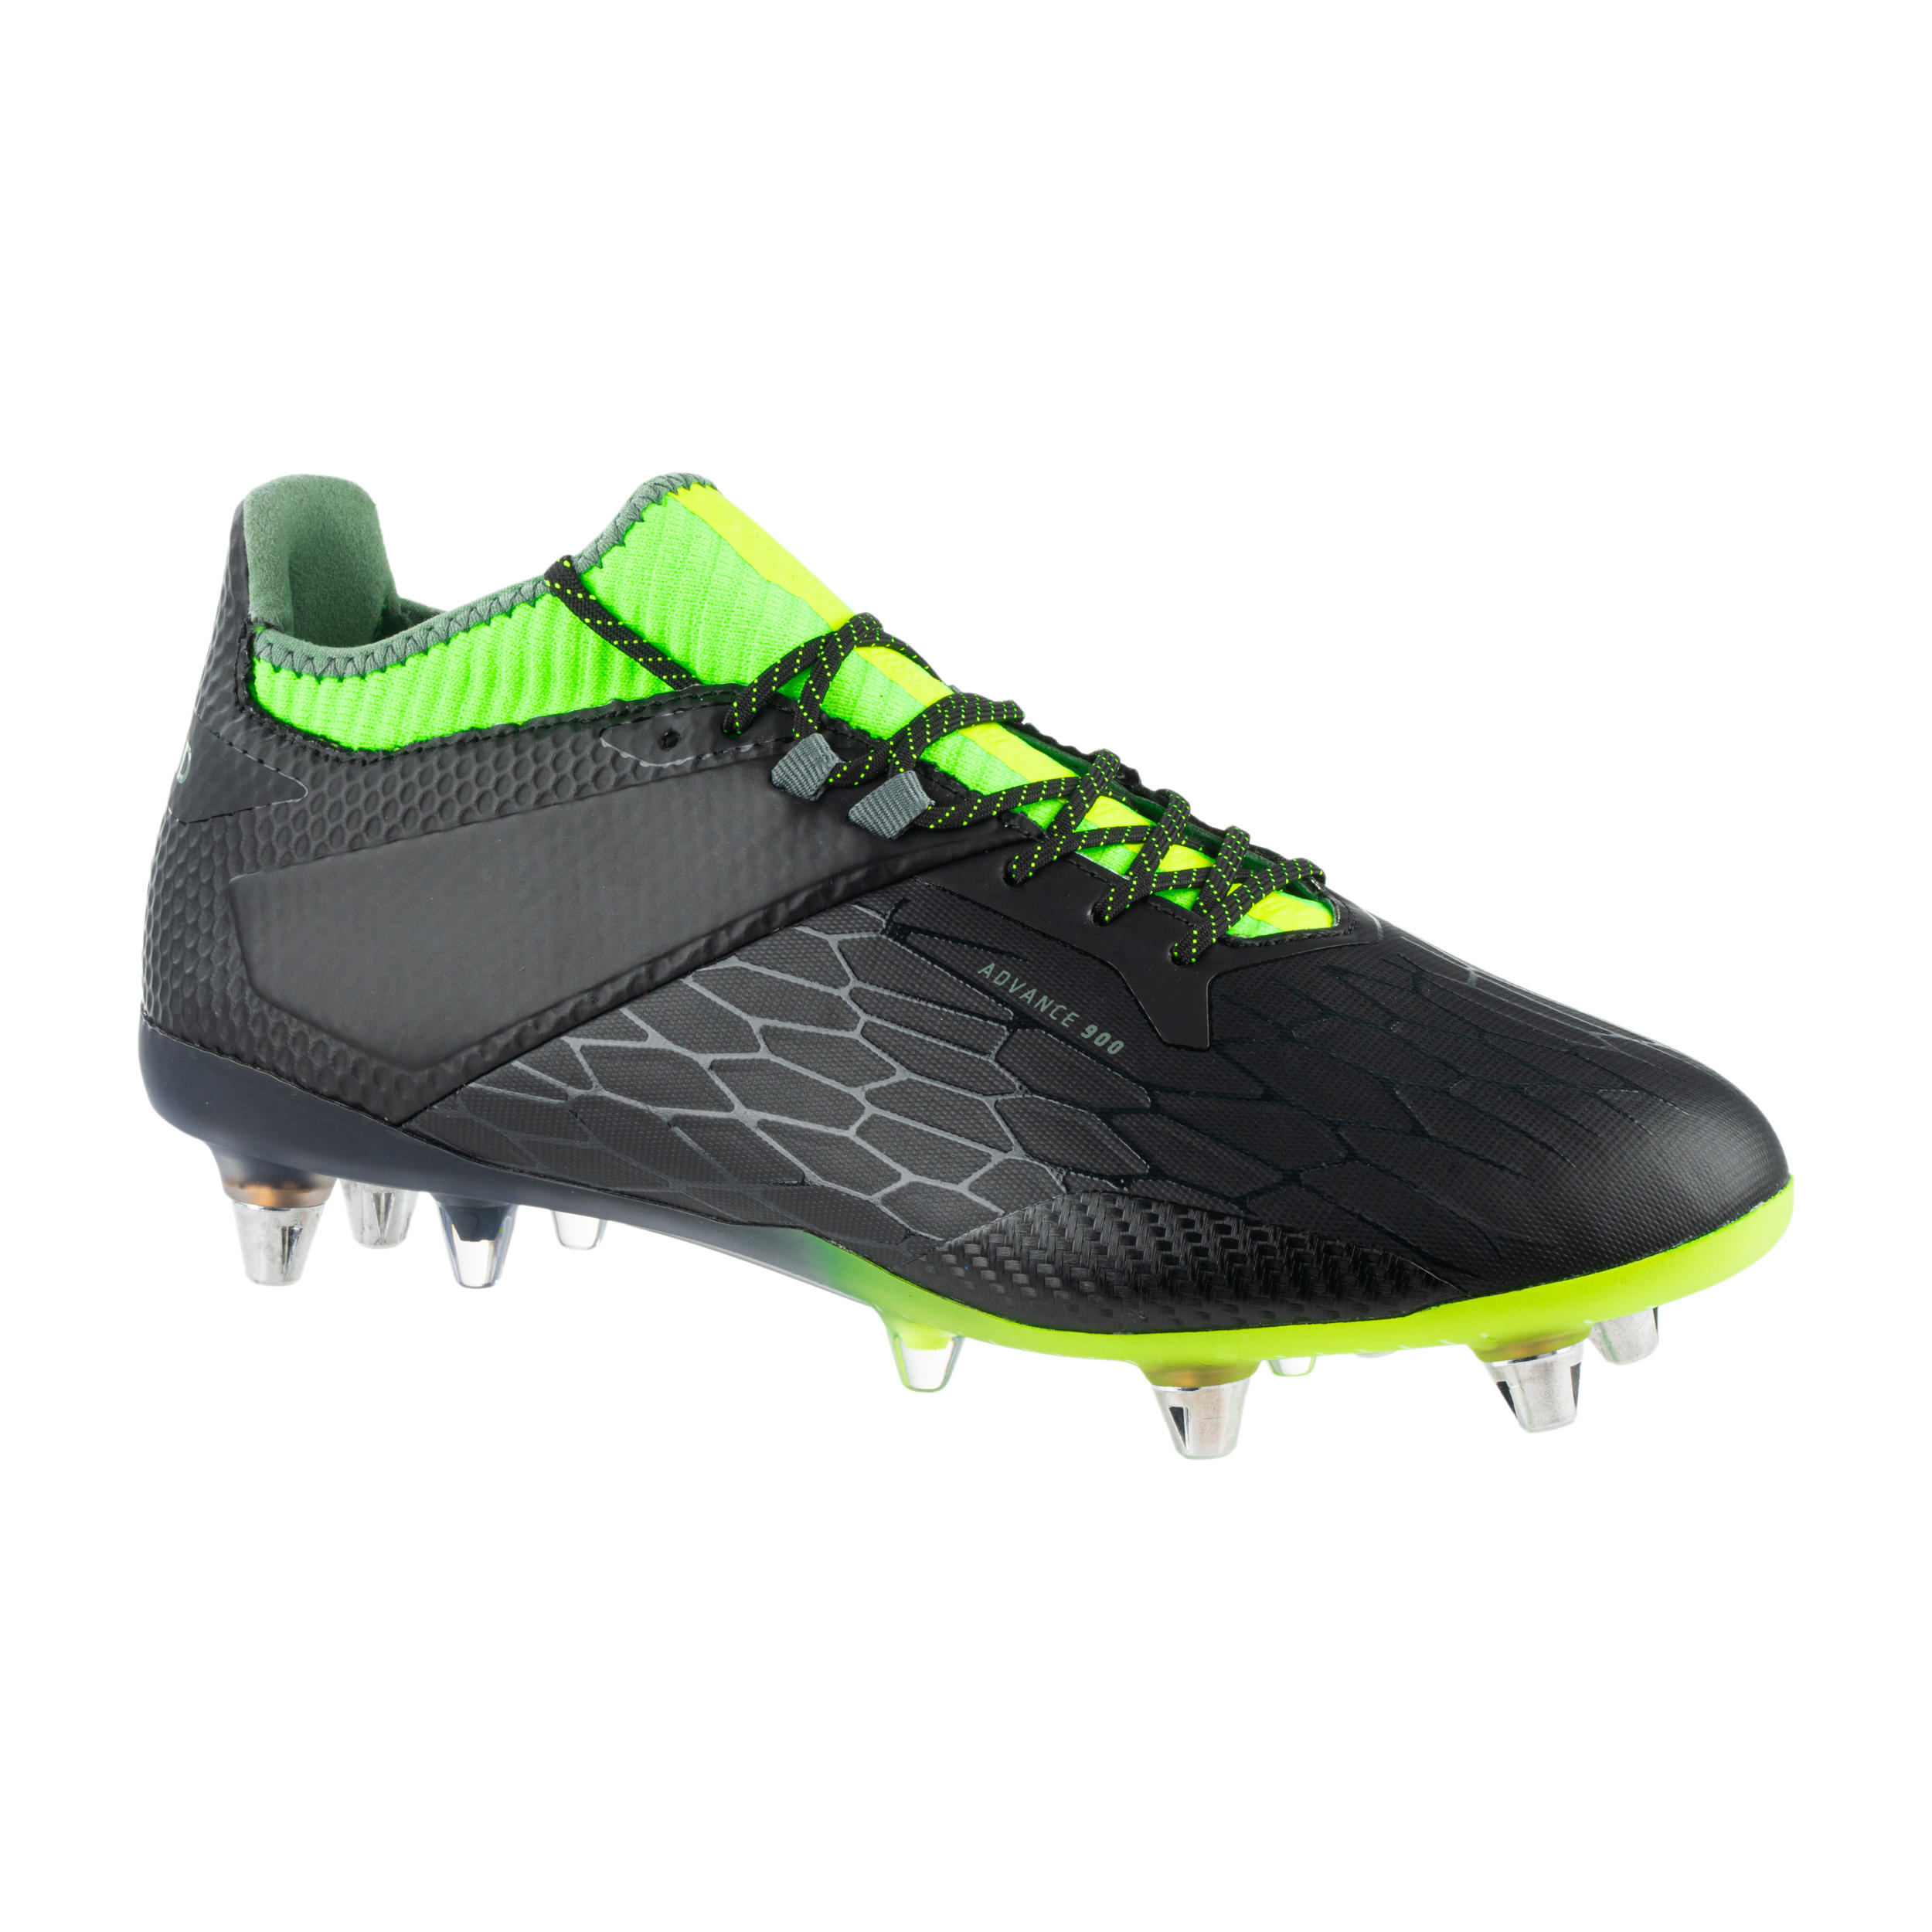 OFFLOAD Adult Screw-In Hybrid Rugby Boots Advance R900 SG - Black/Yellow